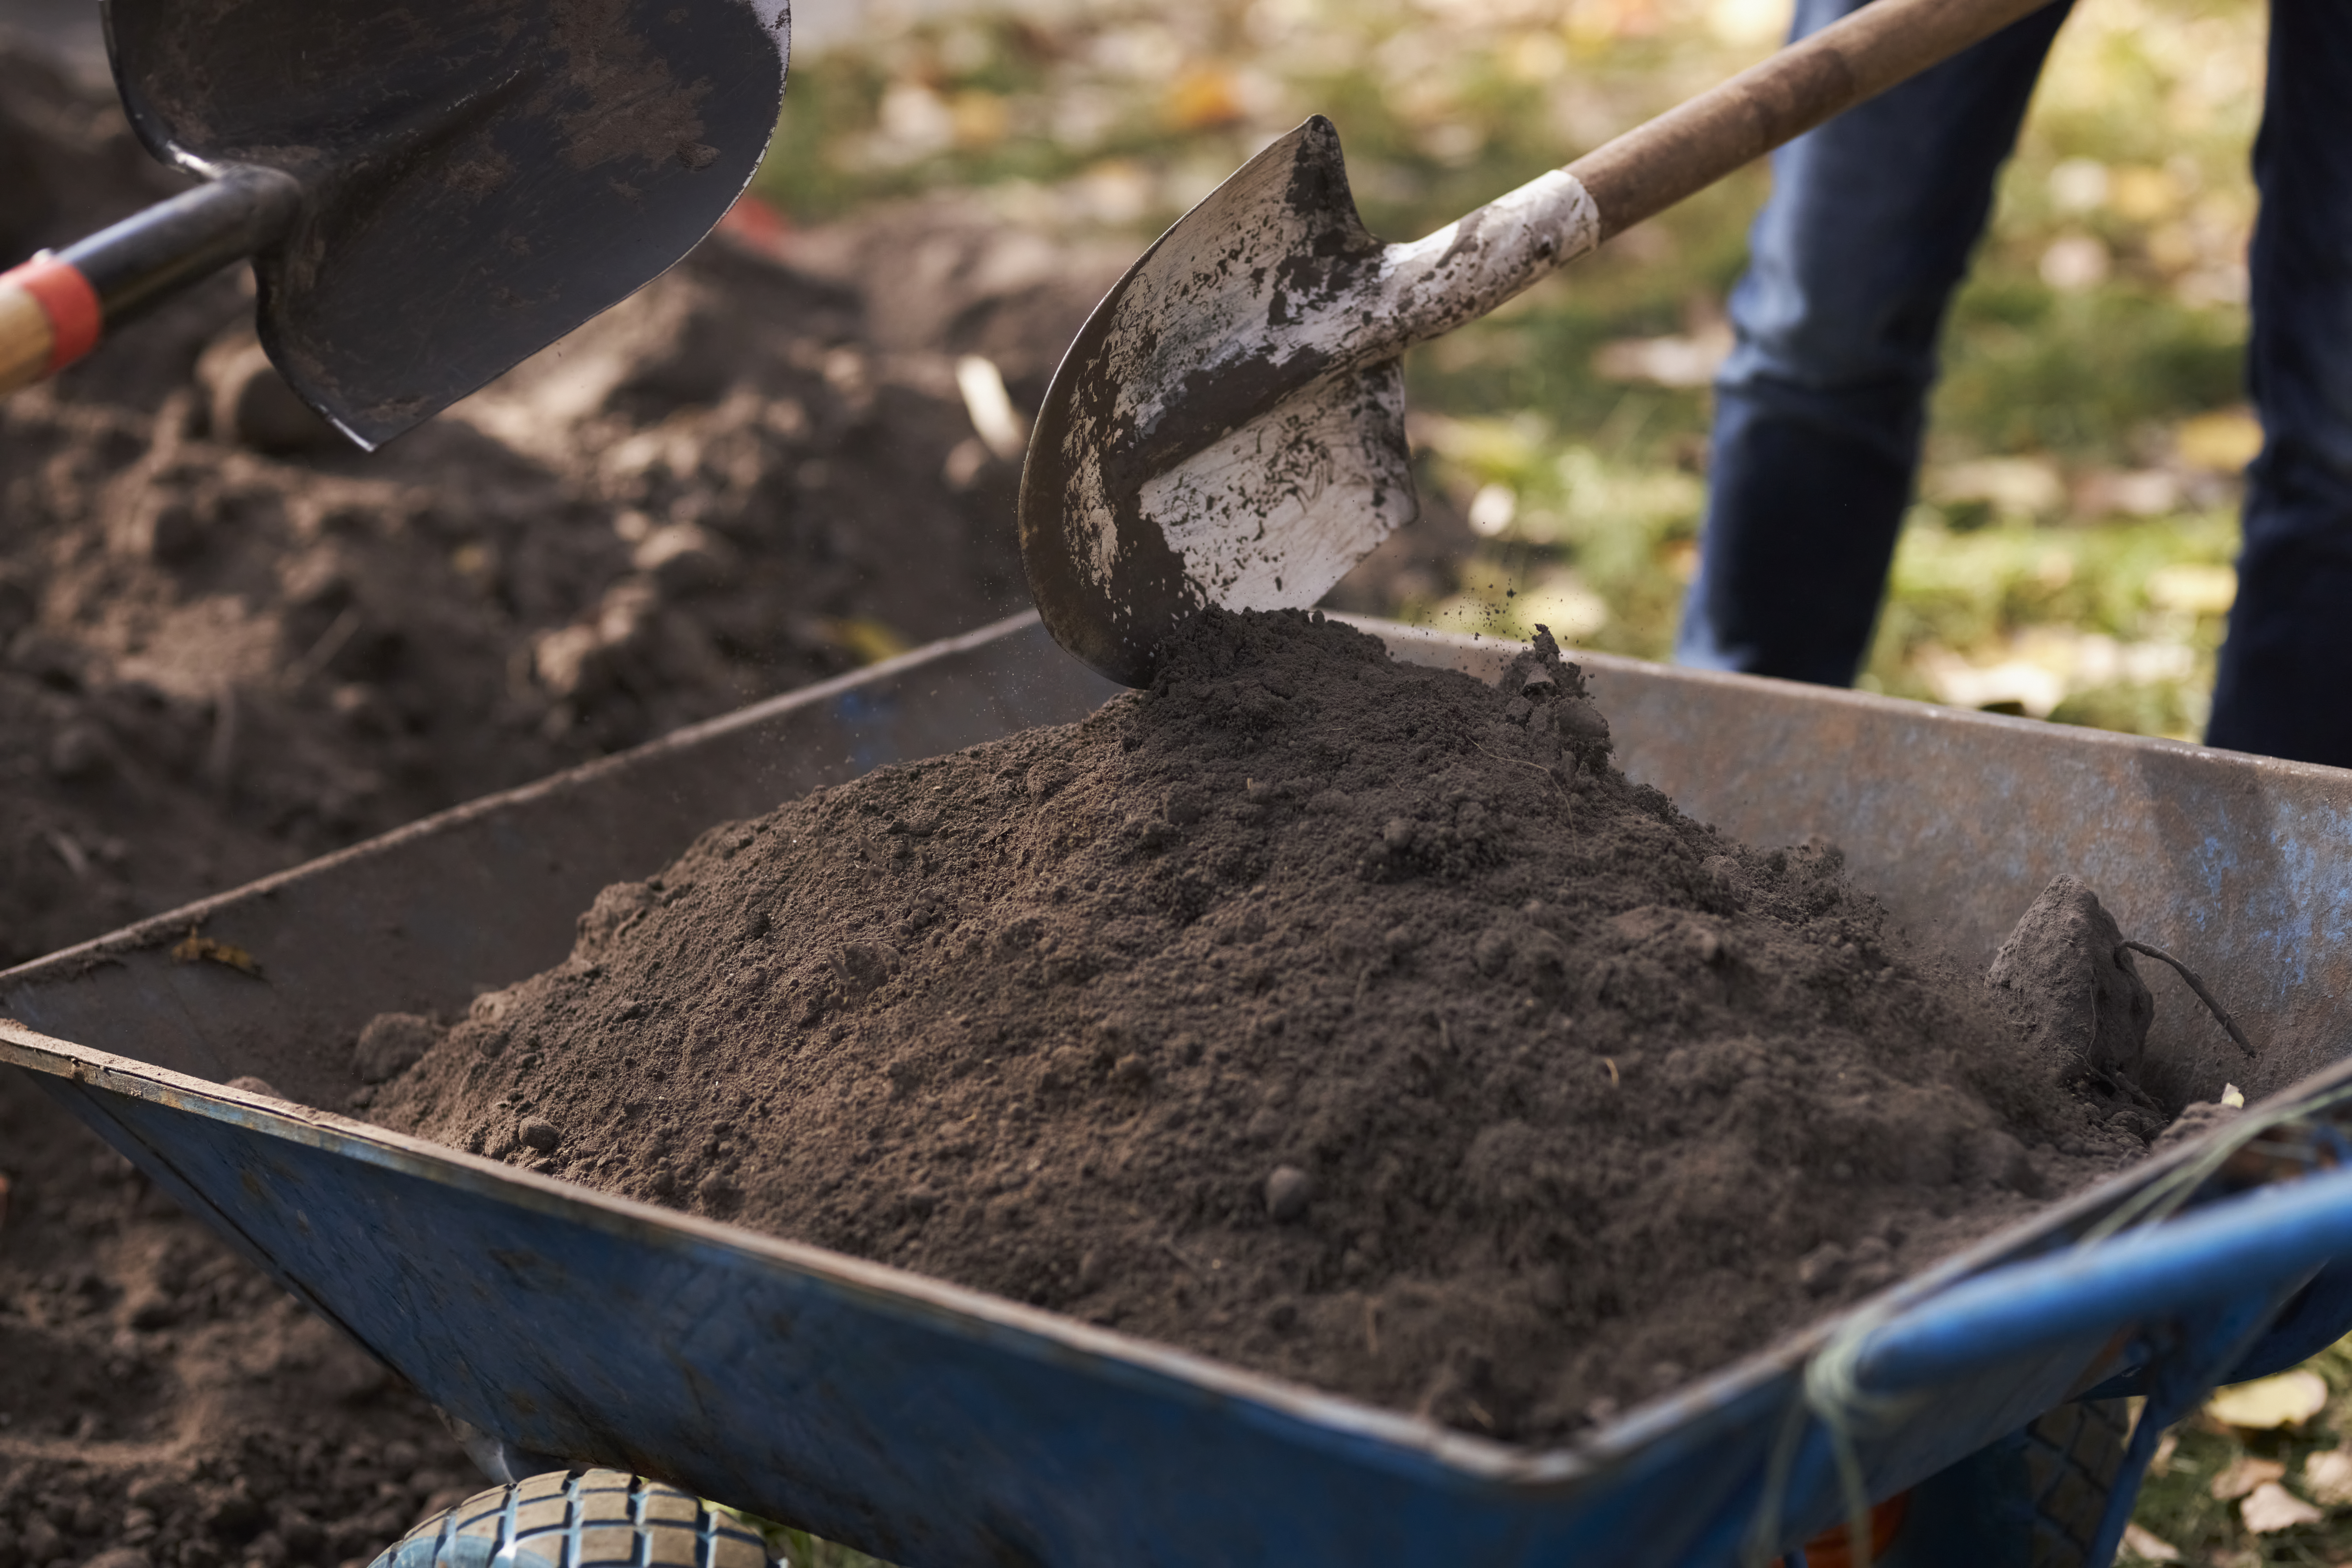 A wheelbarrow is seen nearly full of topsoil. Two spades are seen in the background alongside a pile of topsoil waiting to be loaded and removed by The Best landscapers in Hamilton.